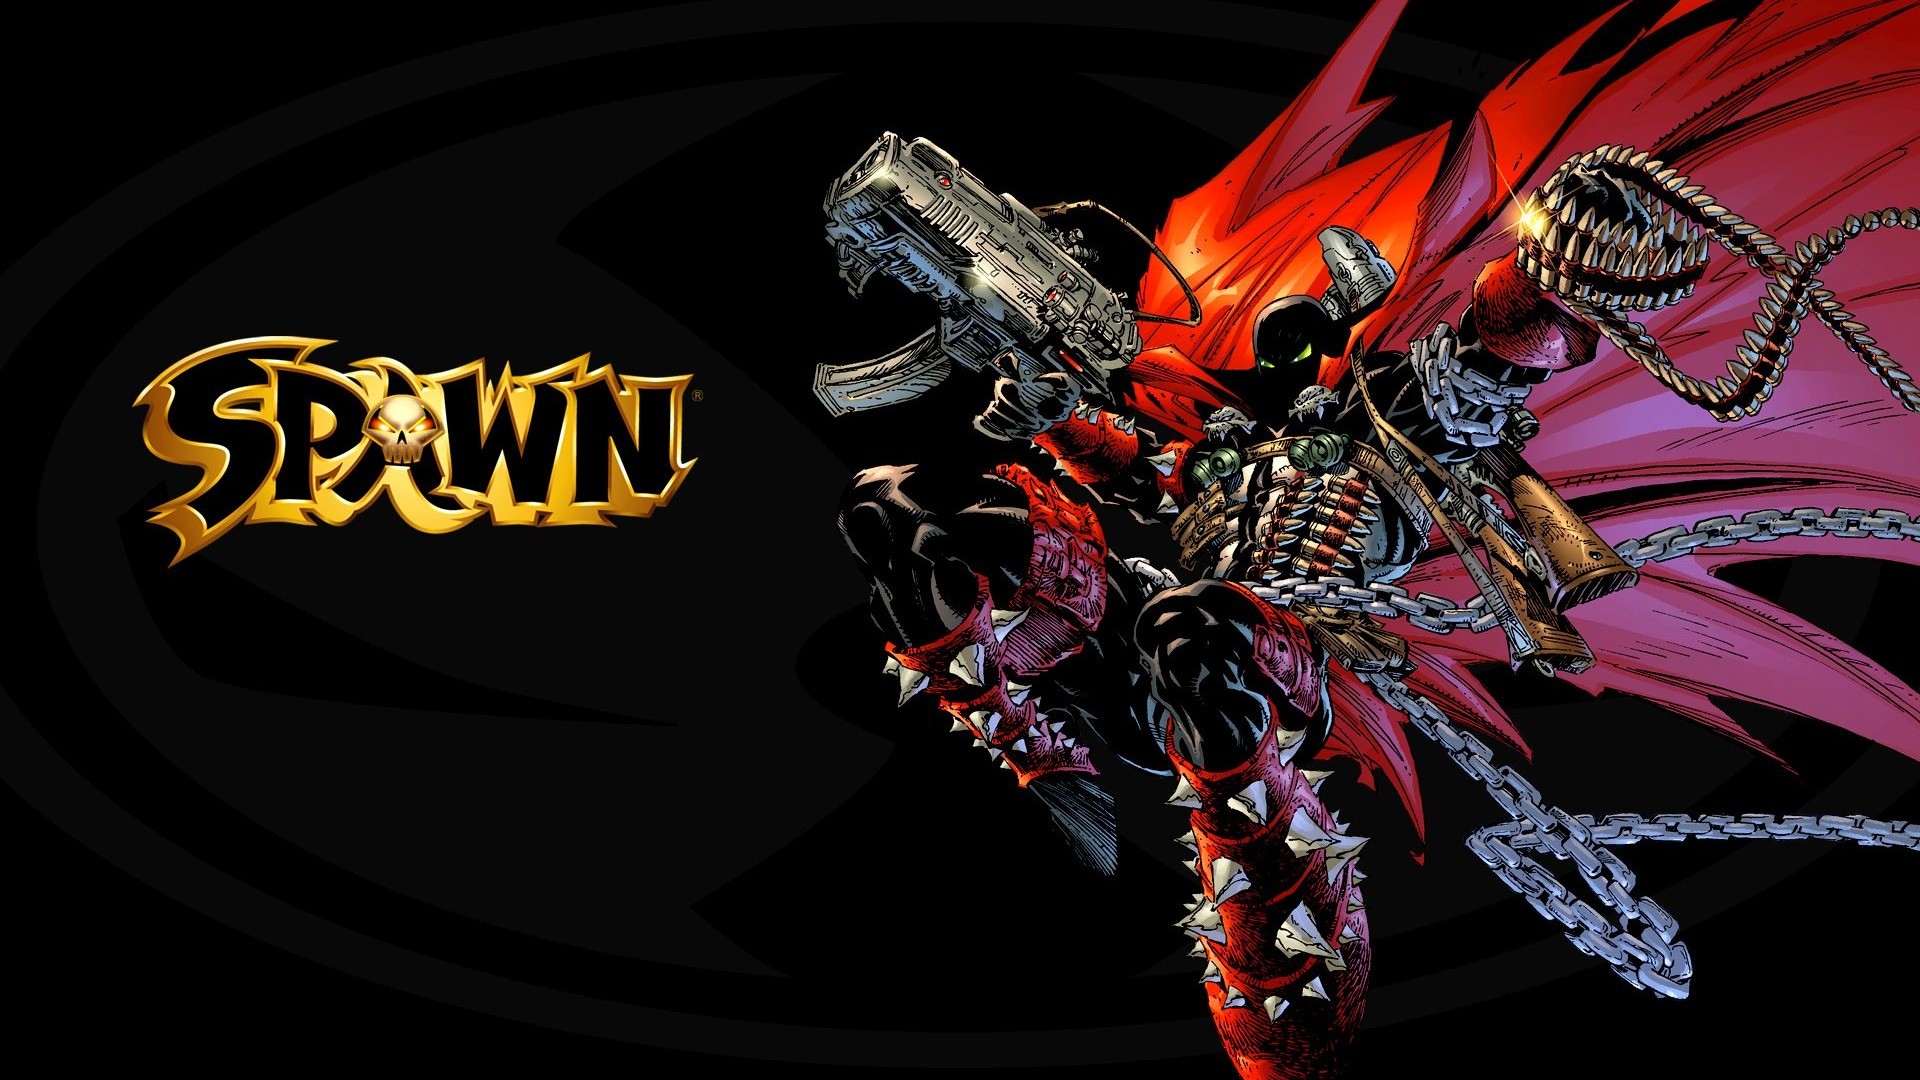 1920x1080 Spawn HD Wallpapers #3 - .